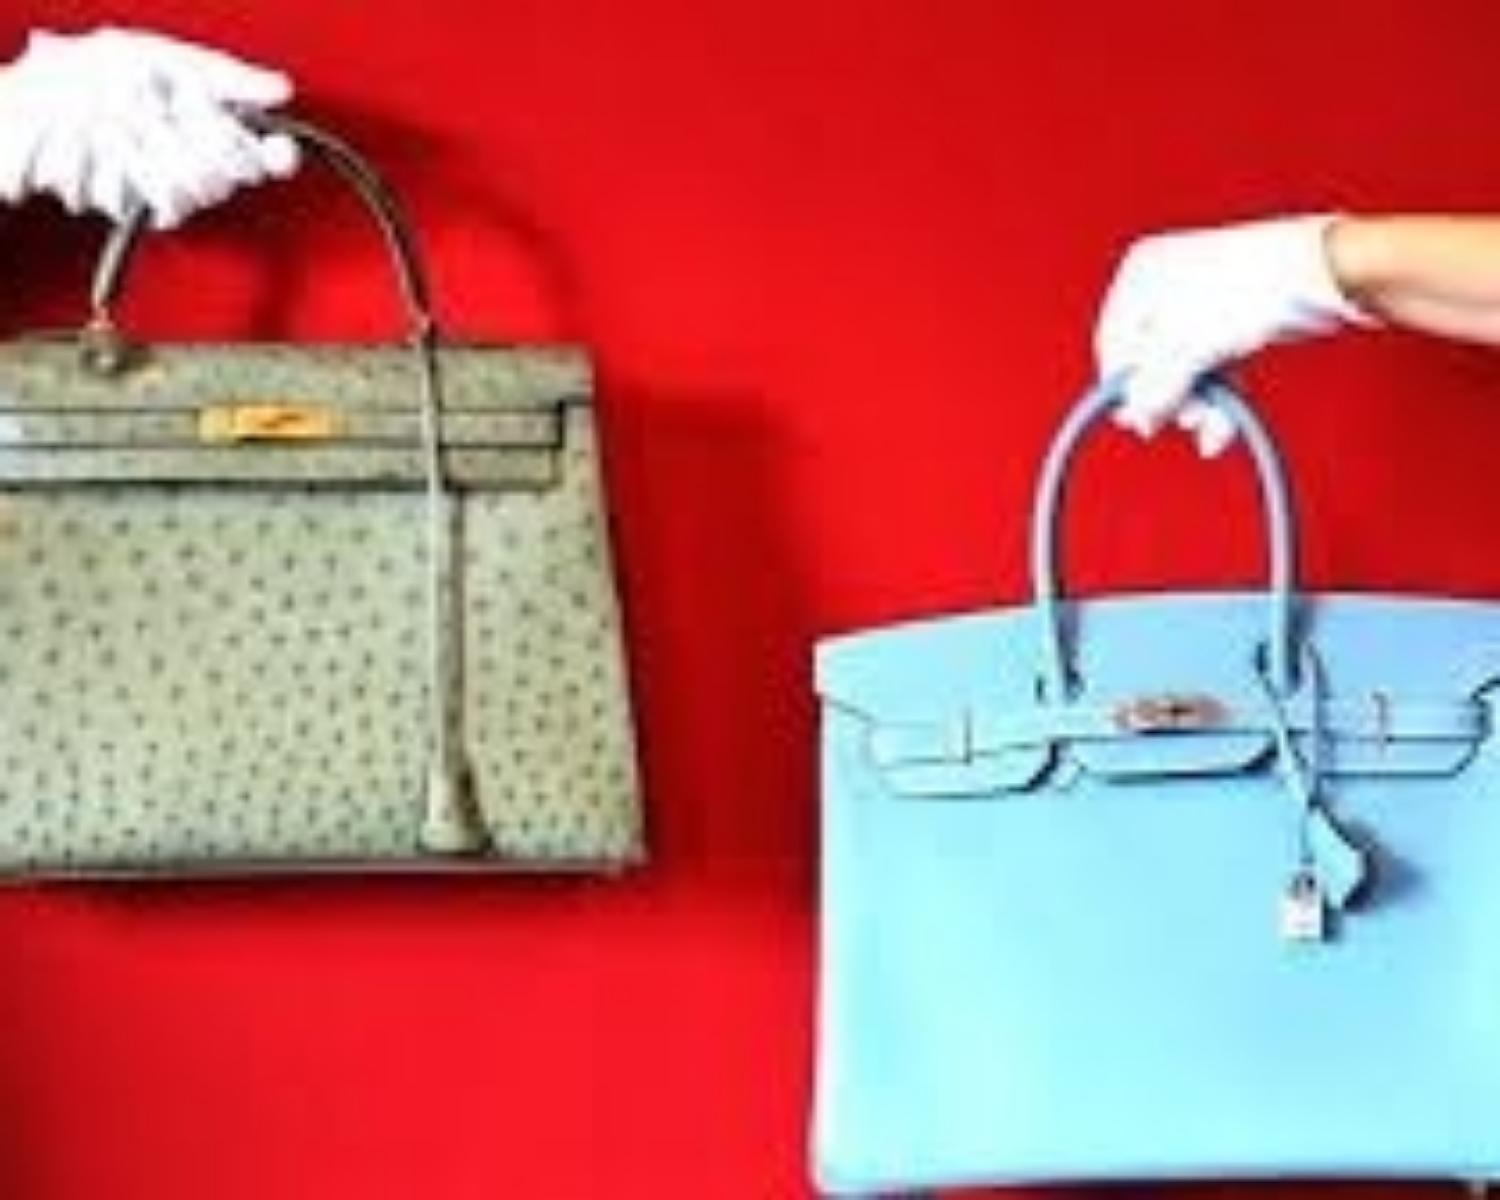 Hermes Birkin: A bag for a young mom